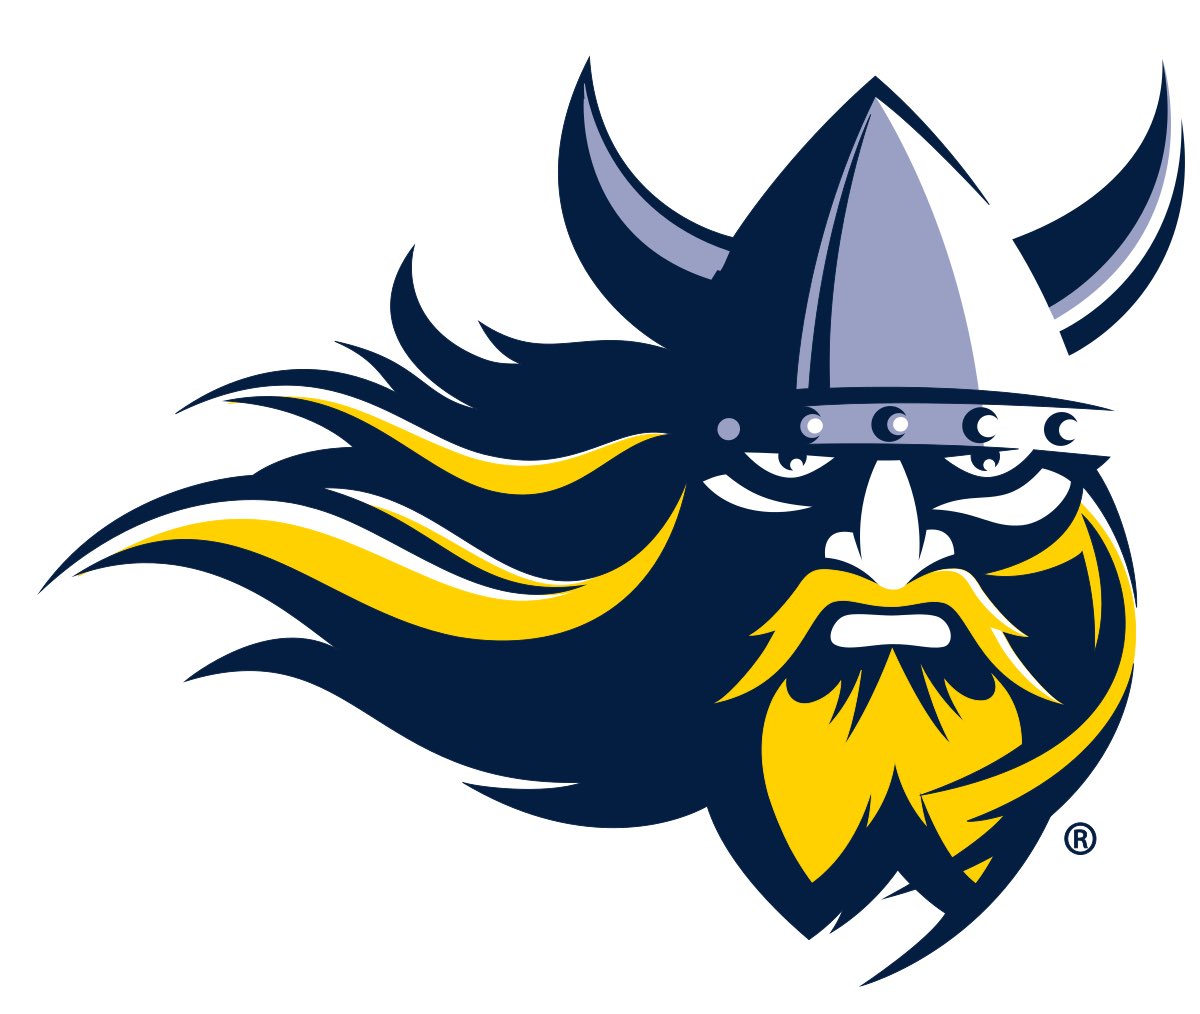 After an amazing visit and conversation with @CoachOJ_ I’m blessed to receive an offer to Augustana university.